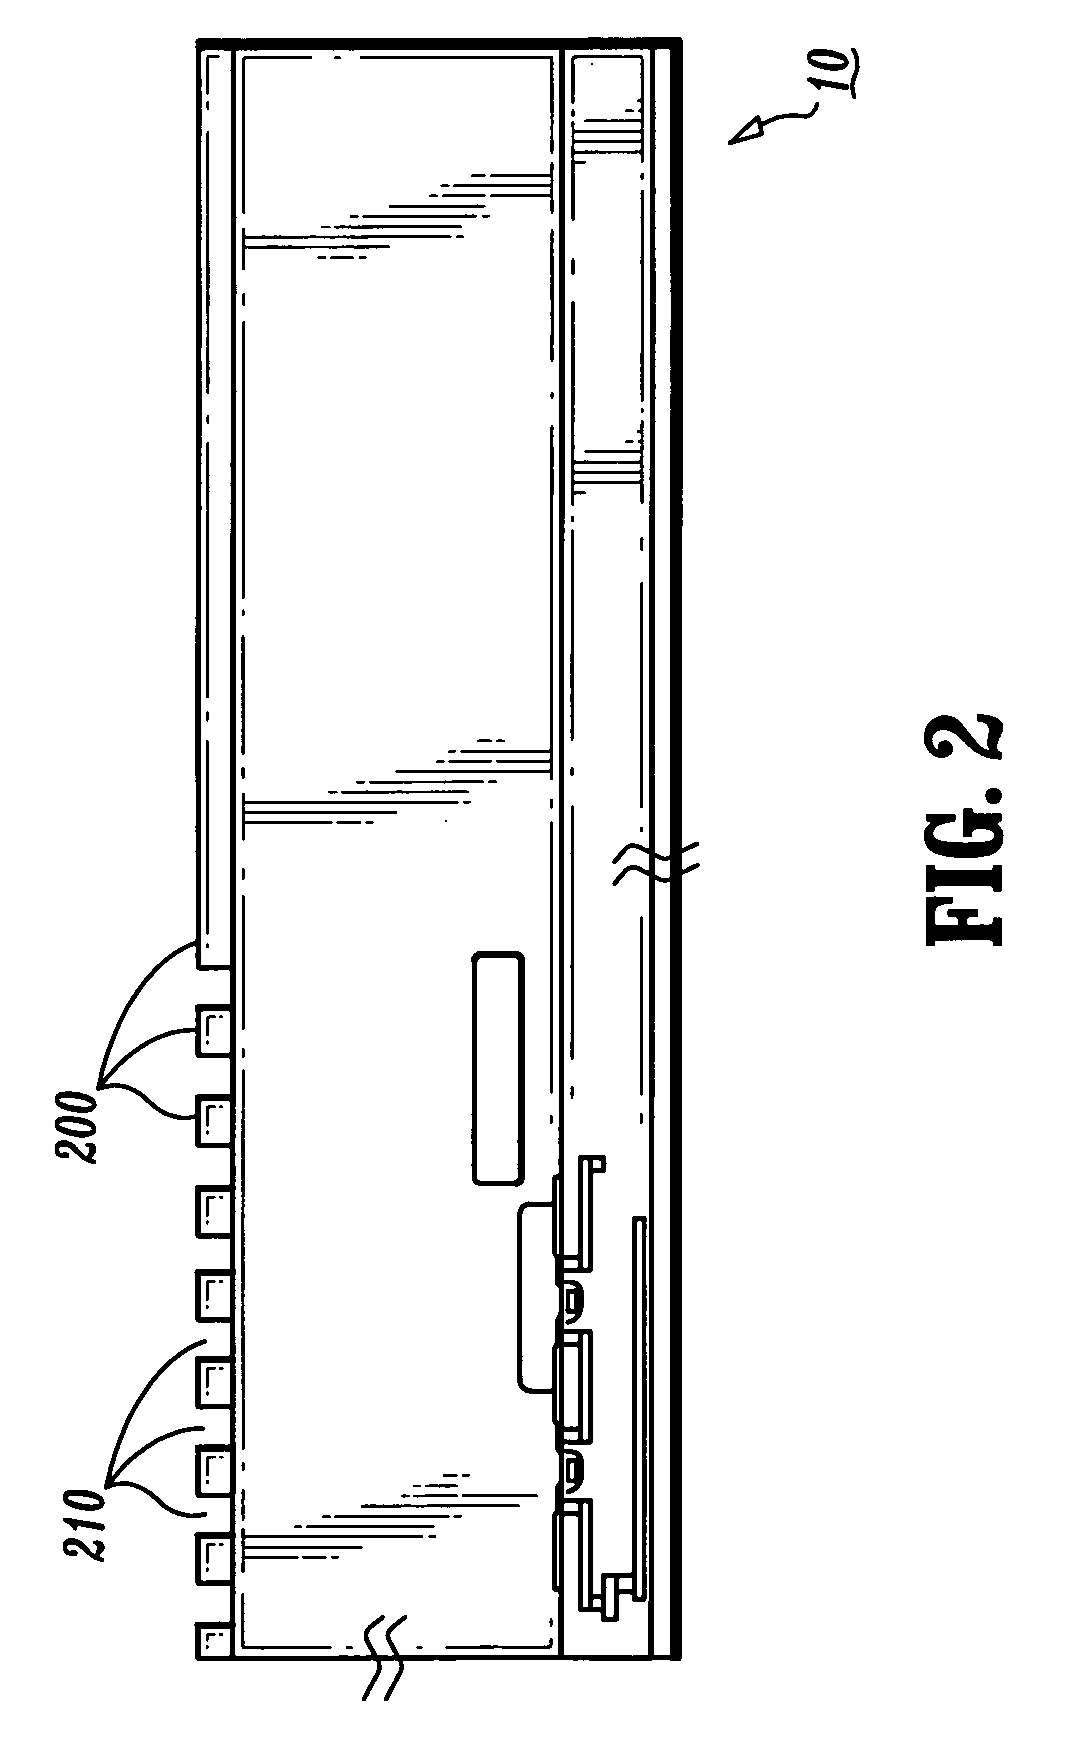 Cooling system for a semiconductor device and method of fabricating same